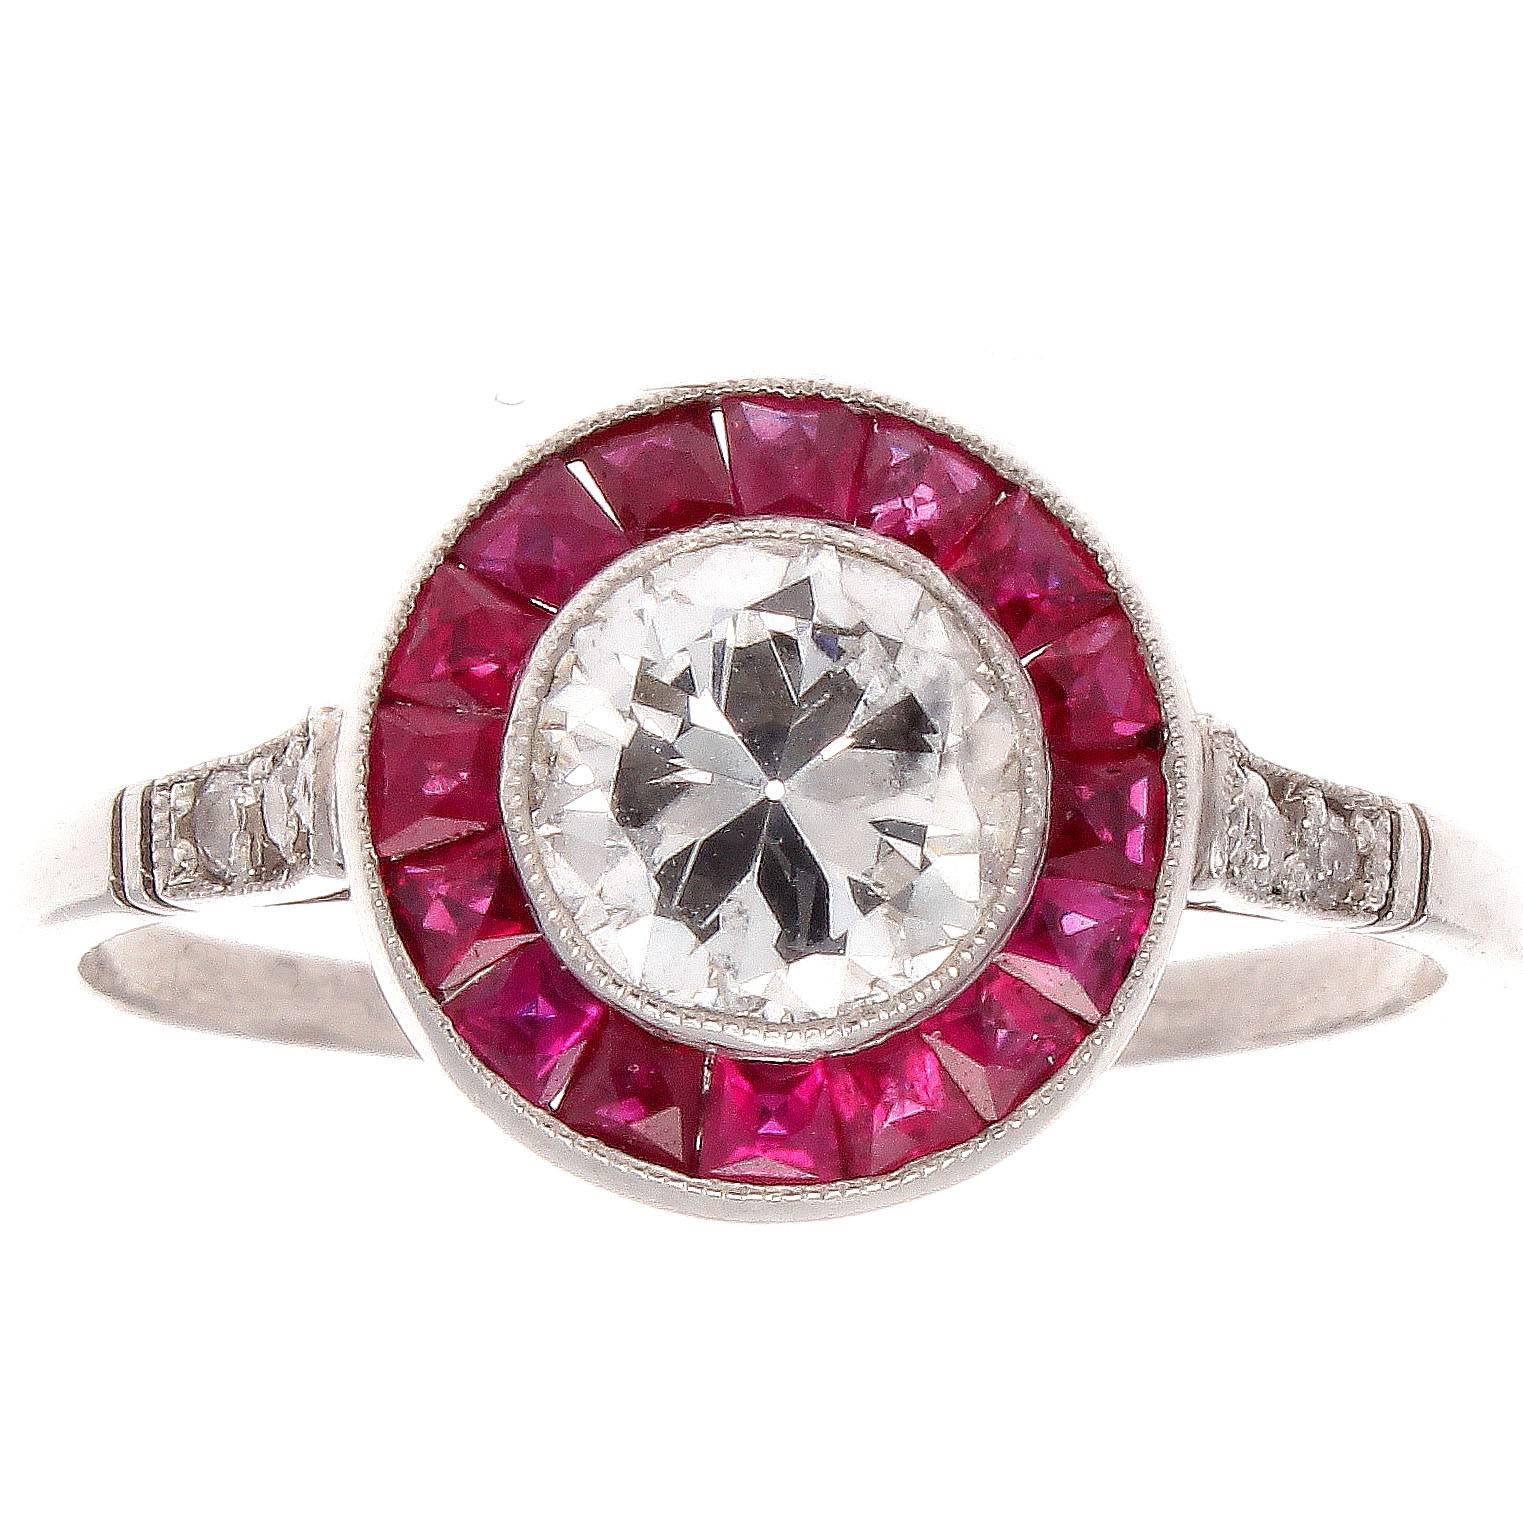 The forever in style halo ring. Featuring a 0.70 carat center diamond that is accompanied with an EGL certificate saying it is G color, VS2 clarity. Surrounded by a halo of vivid red rubies that effortlessly flow into the diamonds cascading down the